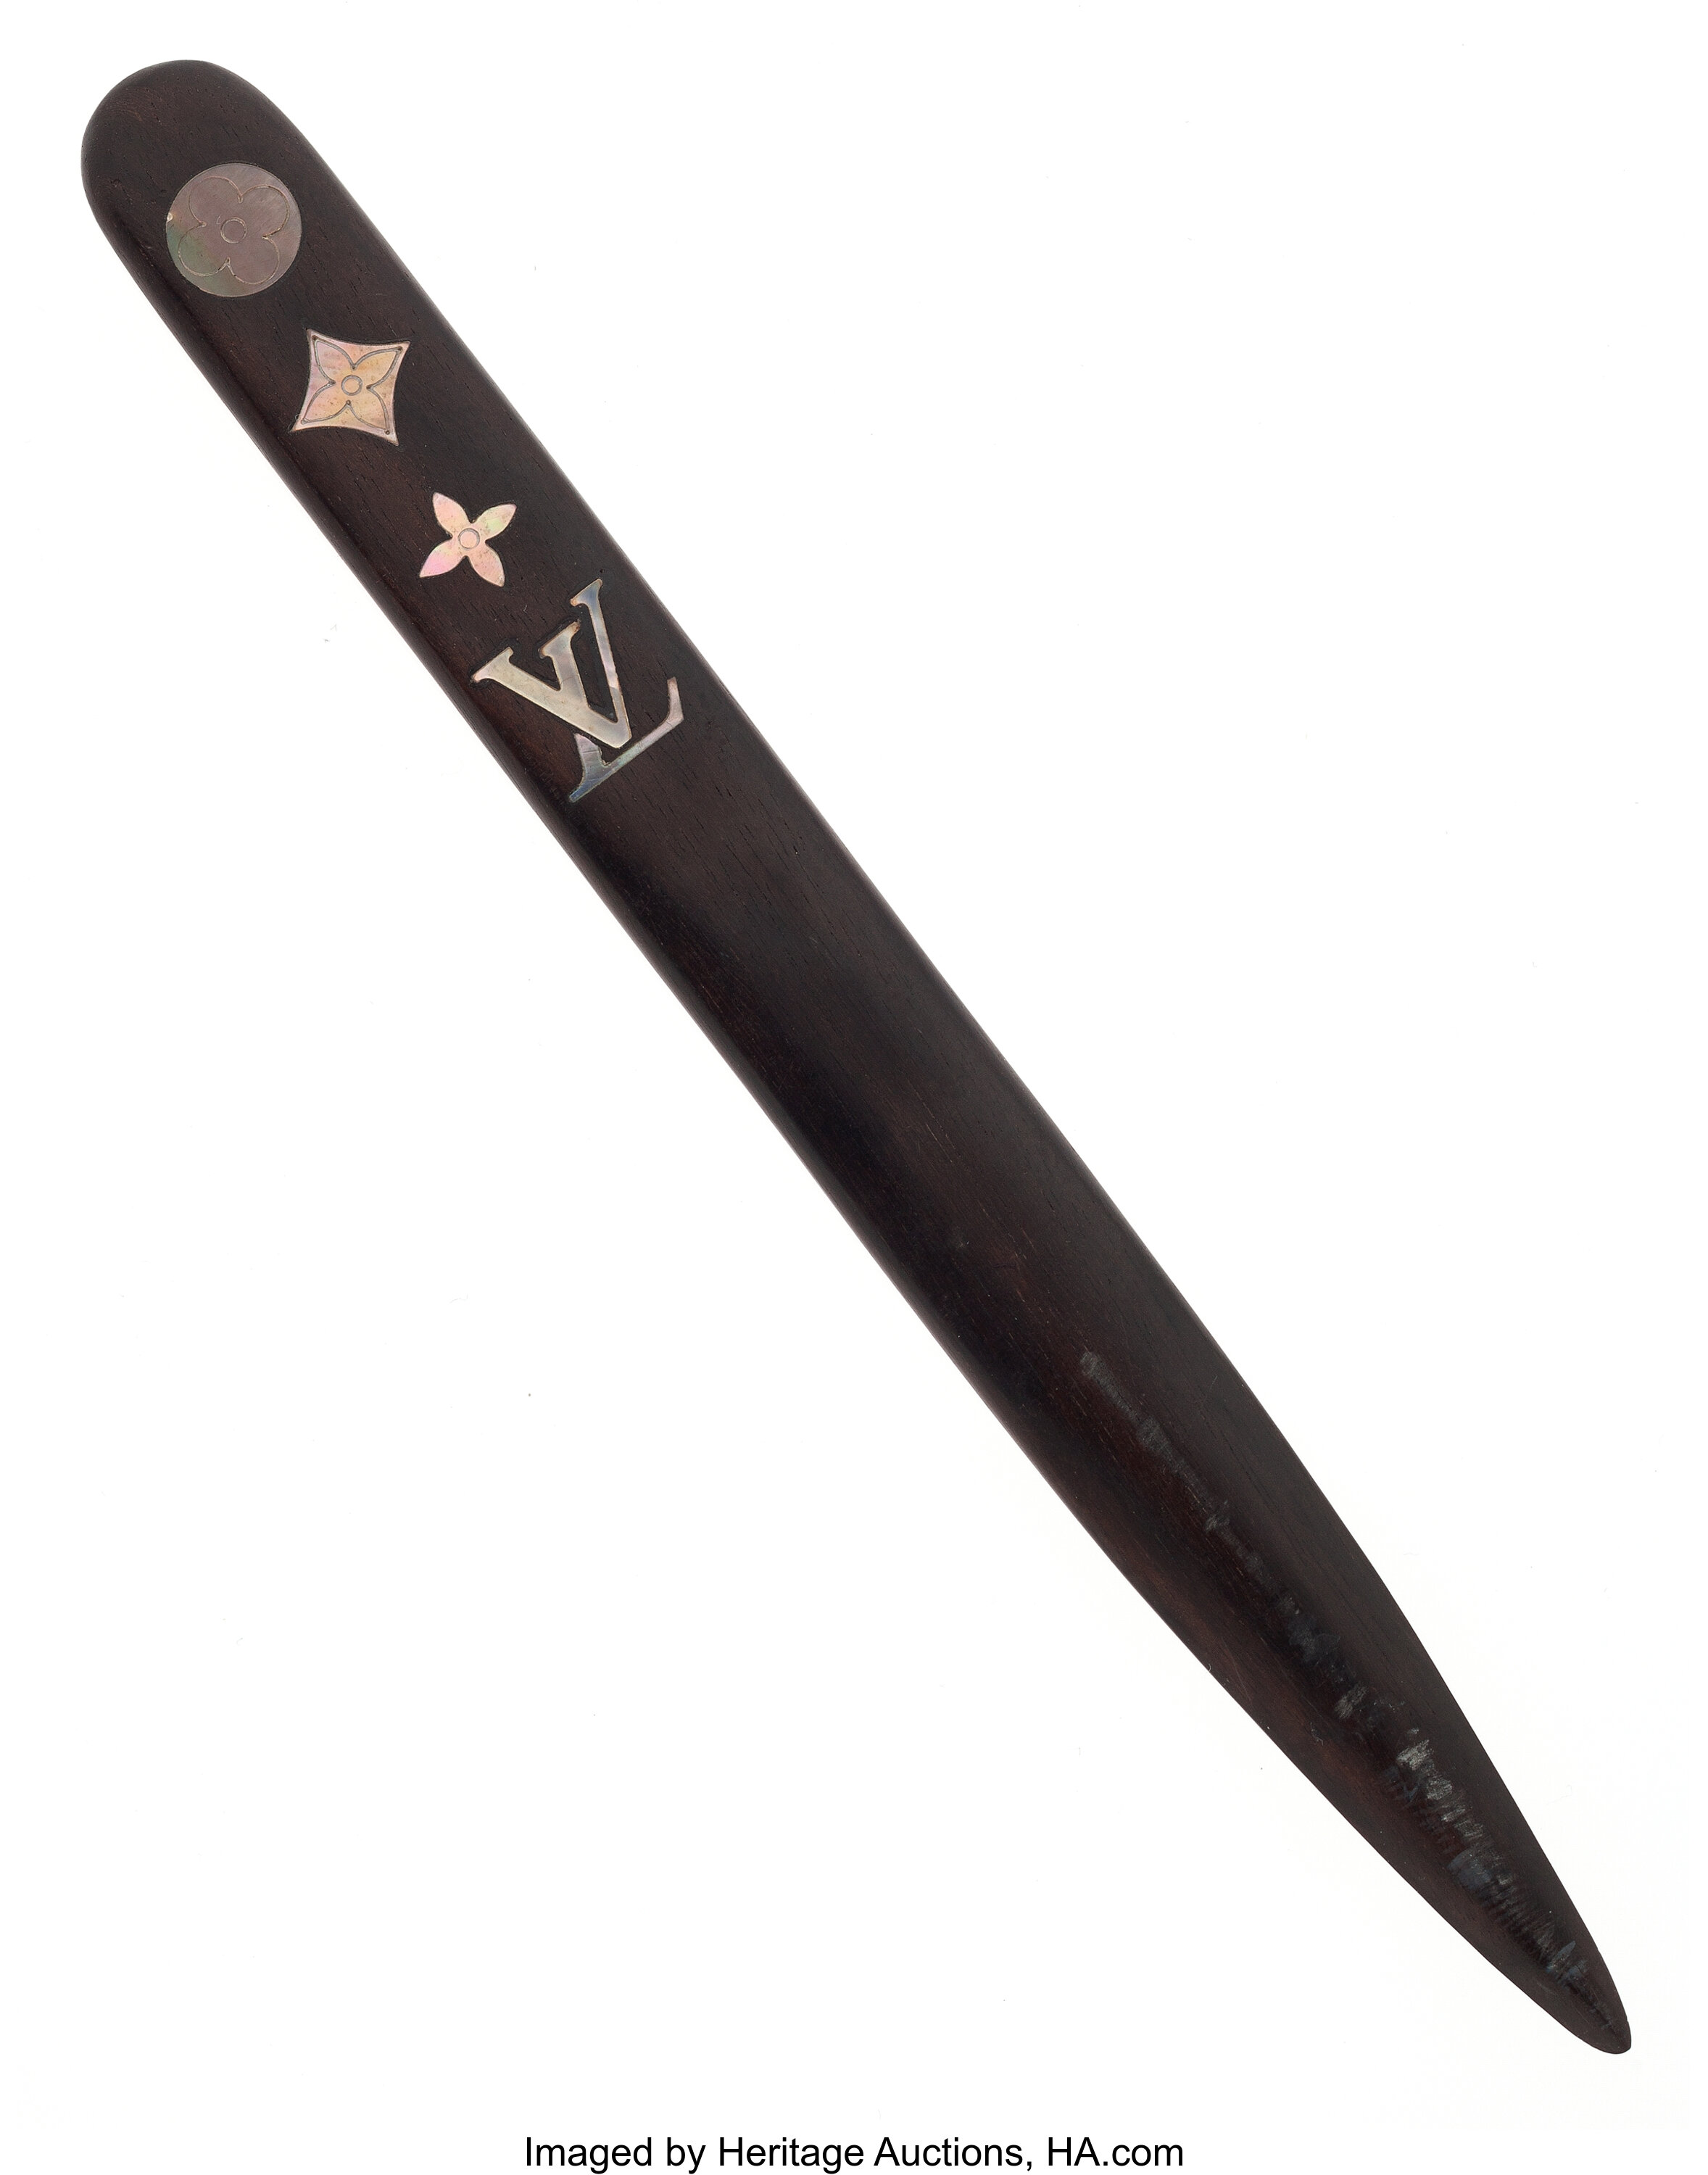 Vintage Louis Vuitton Wooden Letter Opener w/Inlaid Mother-of-Pearl Designs